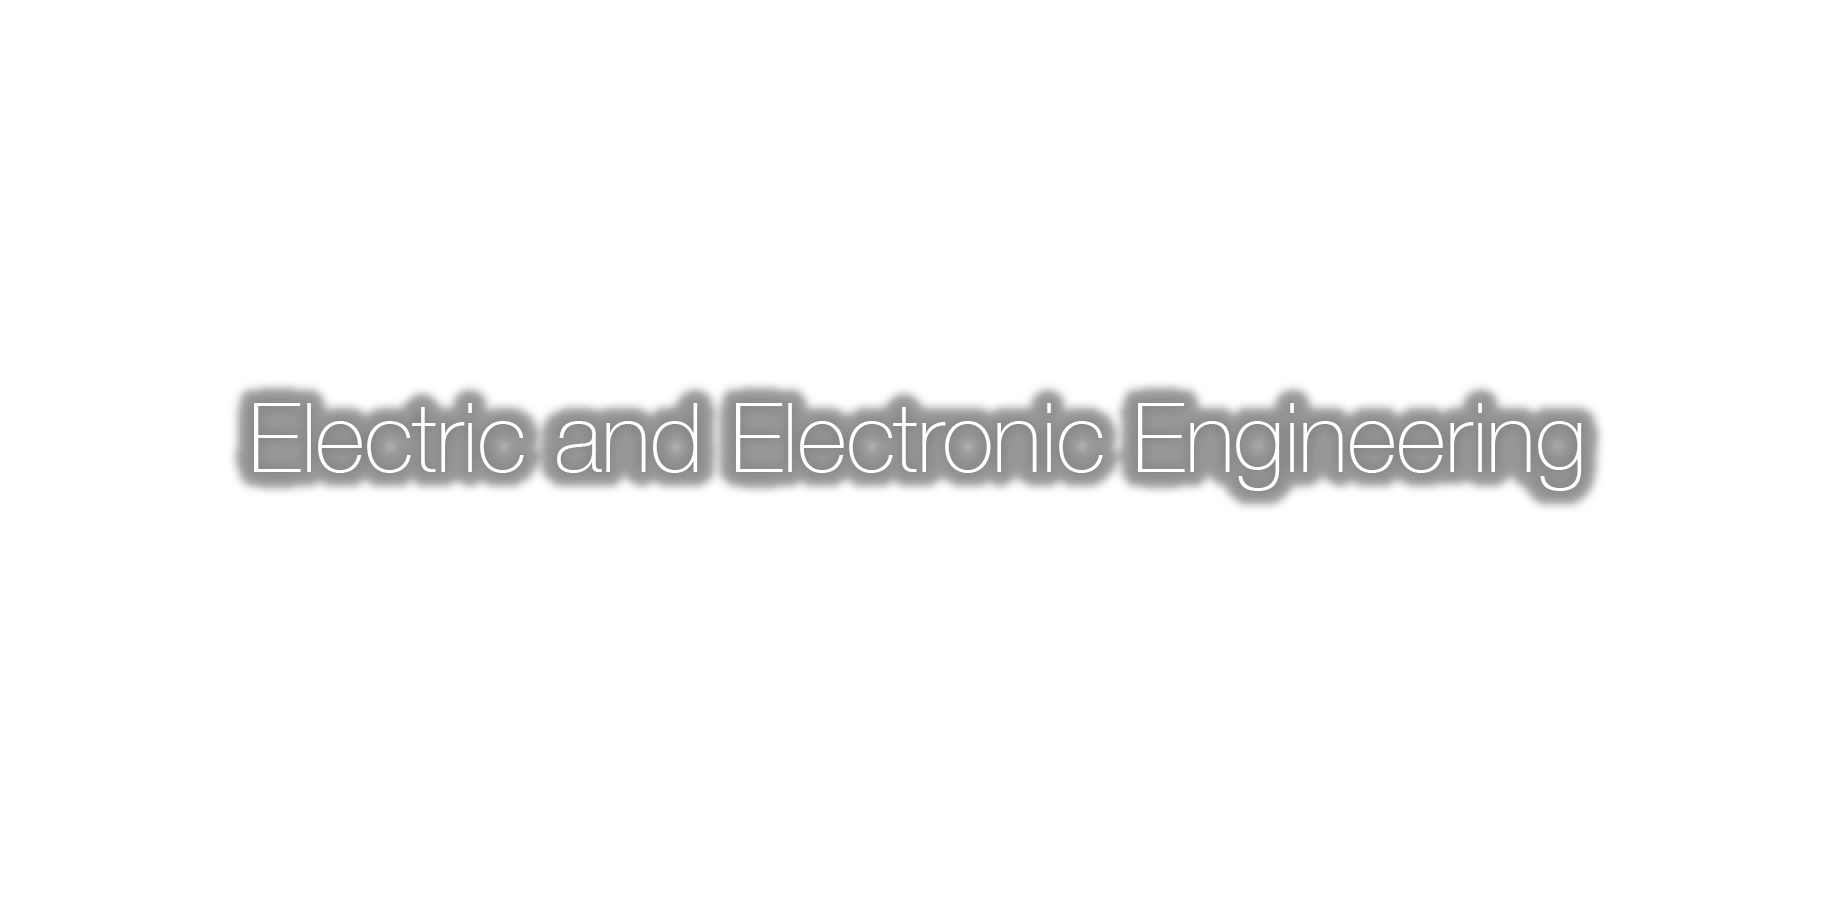 Electric and Electronic Engineering